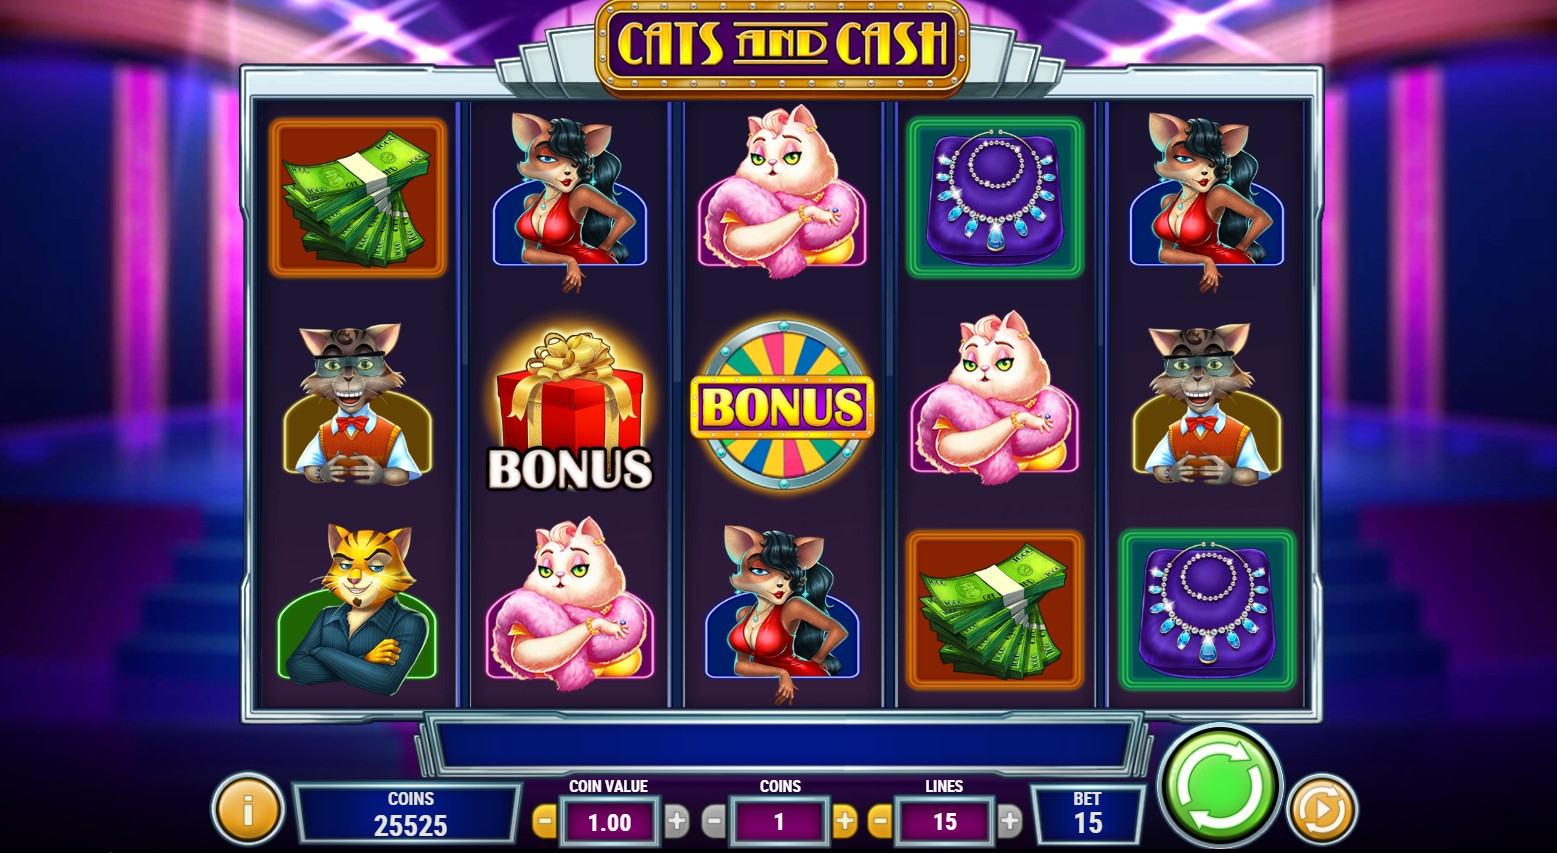 Cats and Cash (Cats and Cash) from category Slots